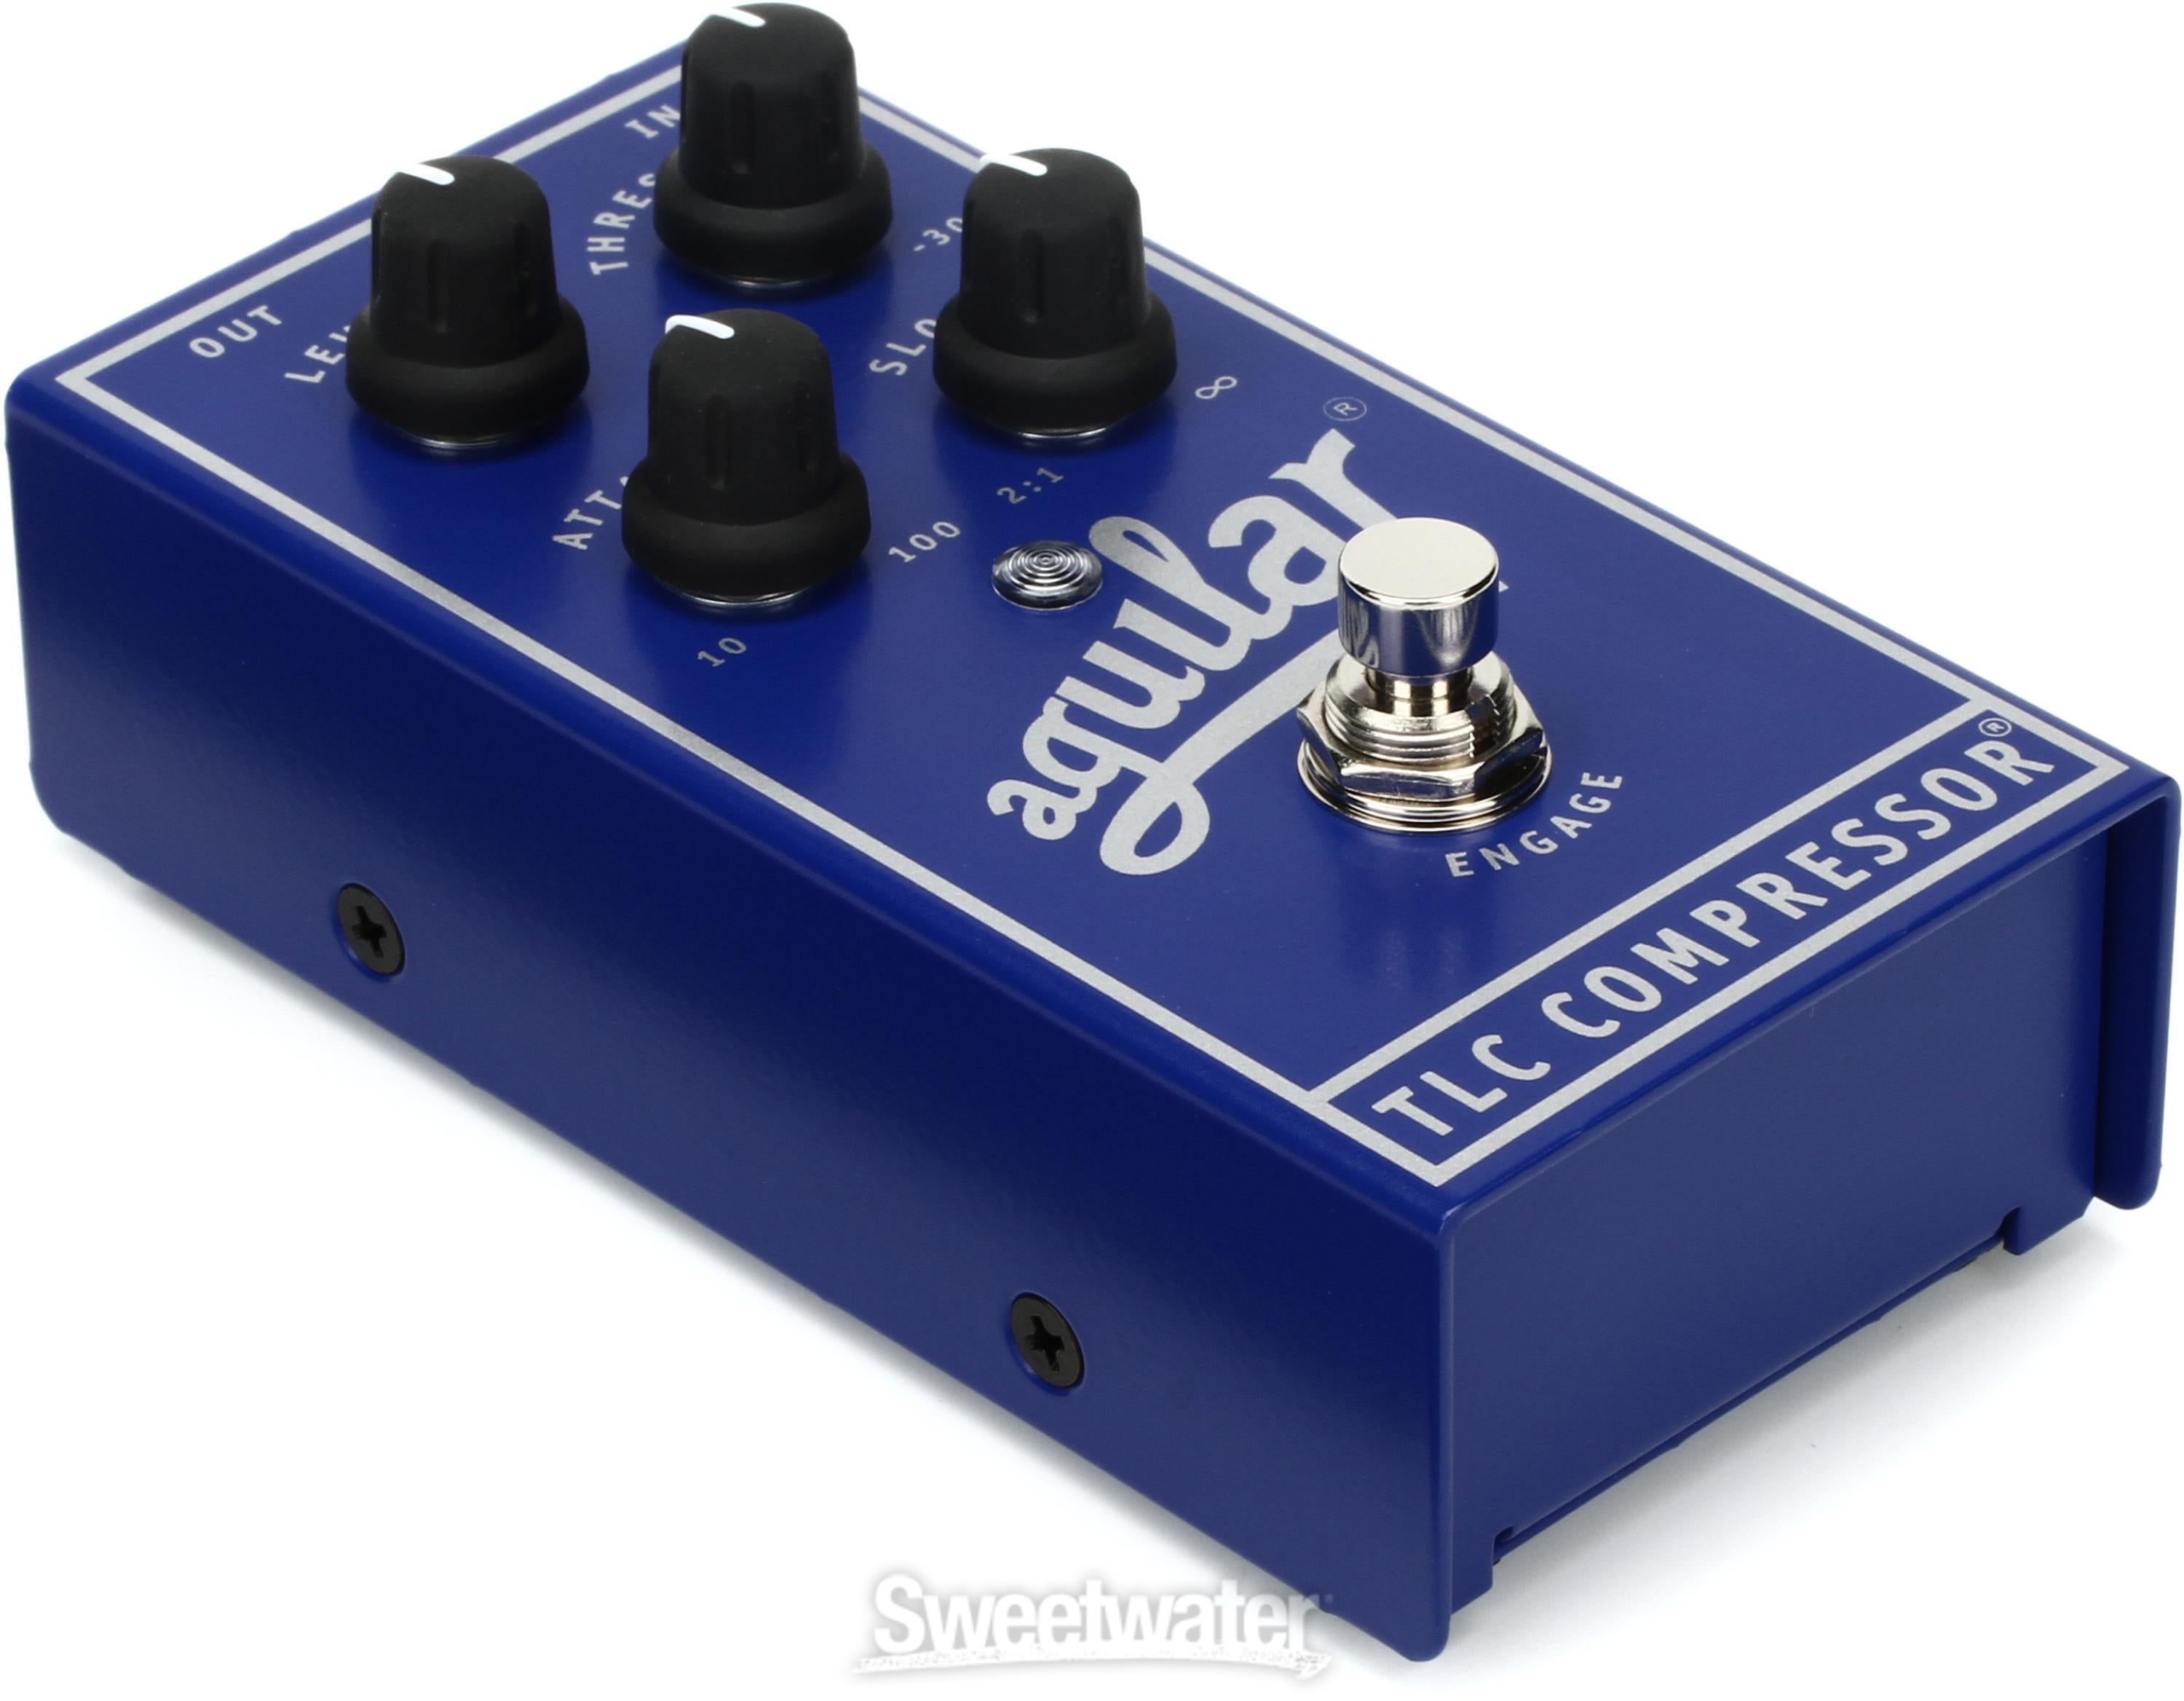 Aguilar TLC Bass Compressor Pedal Reviews | Sweetwater